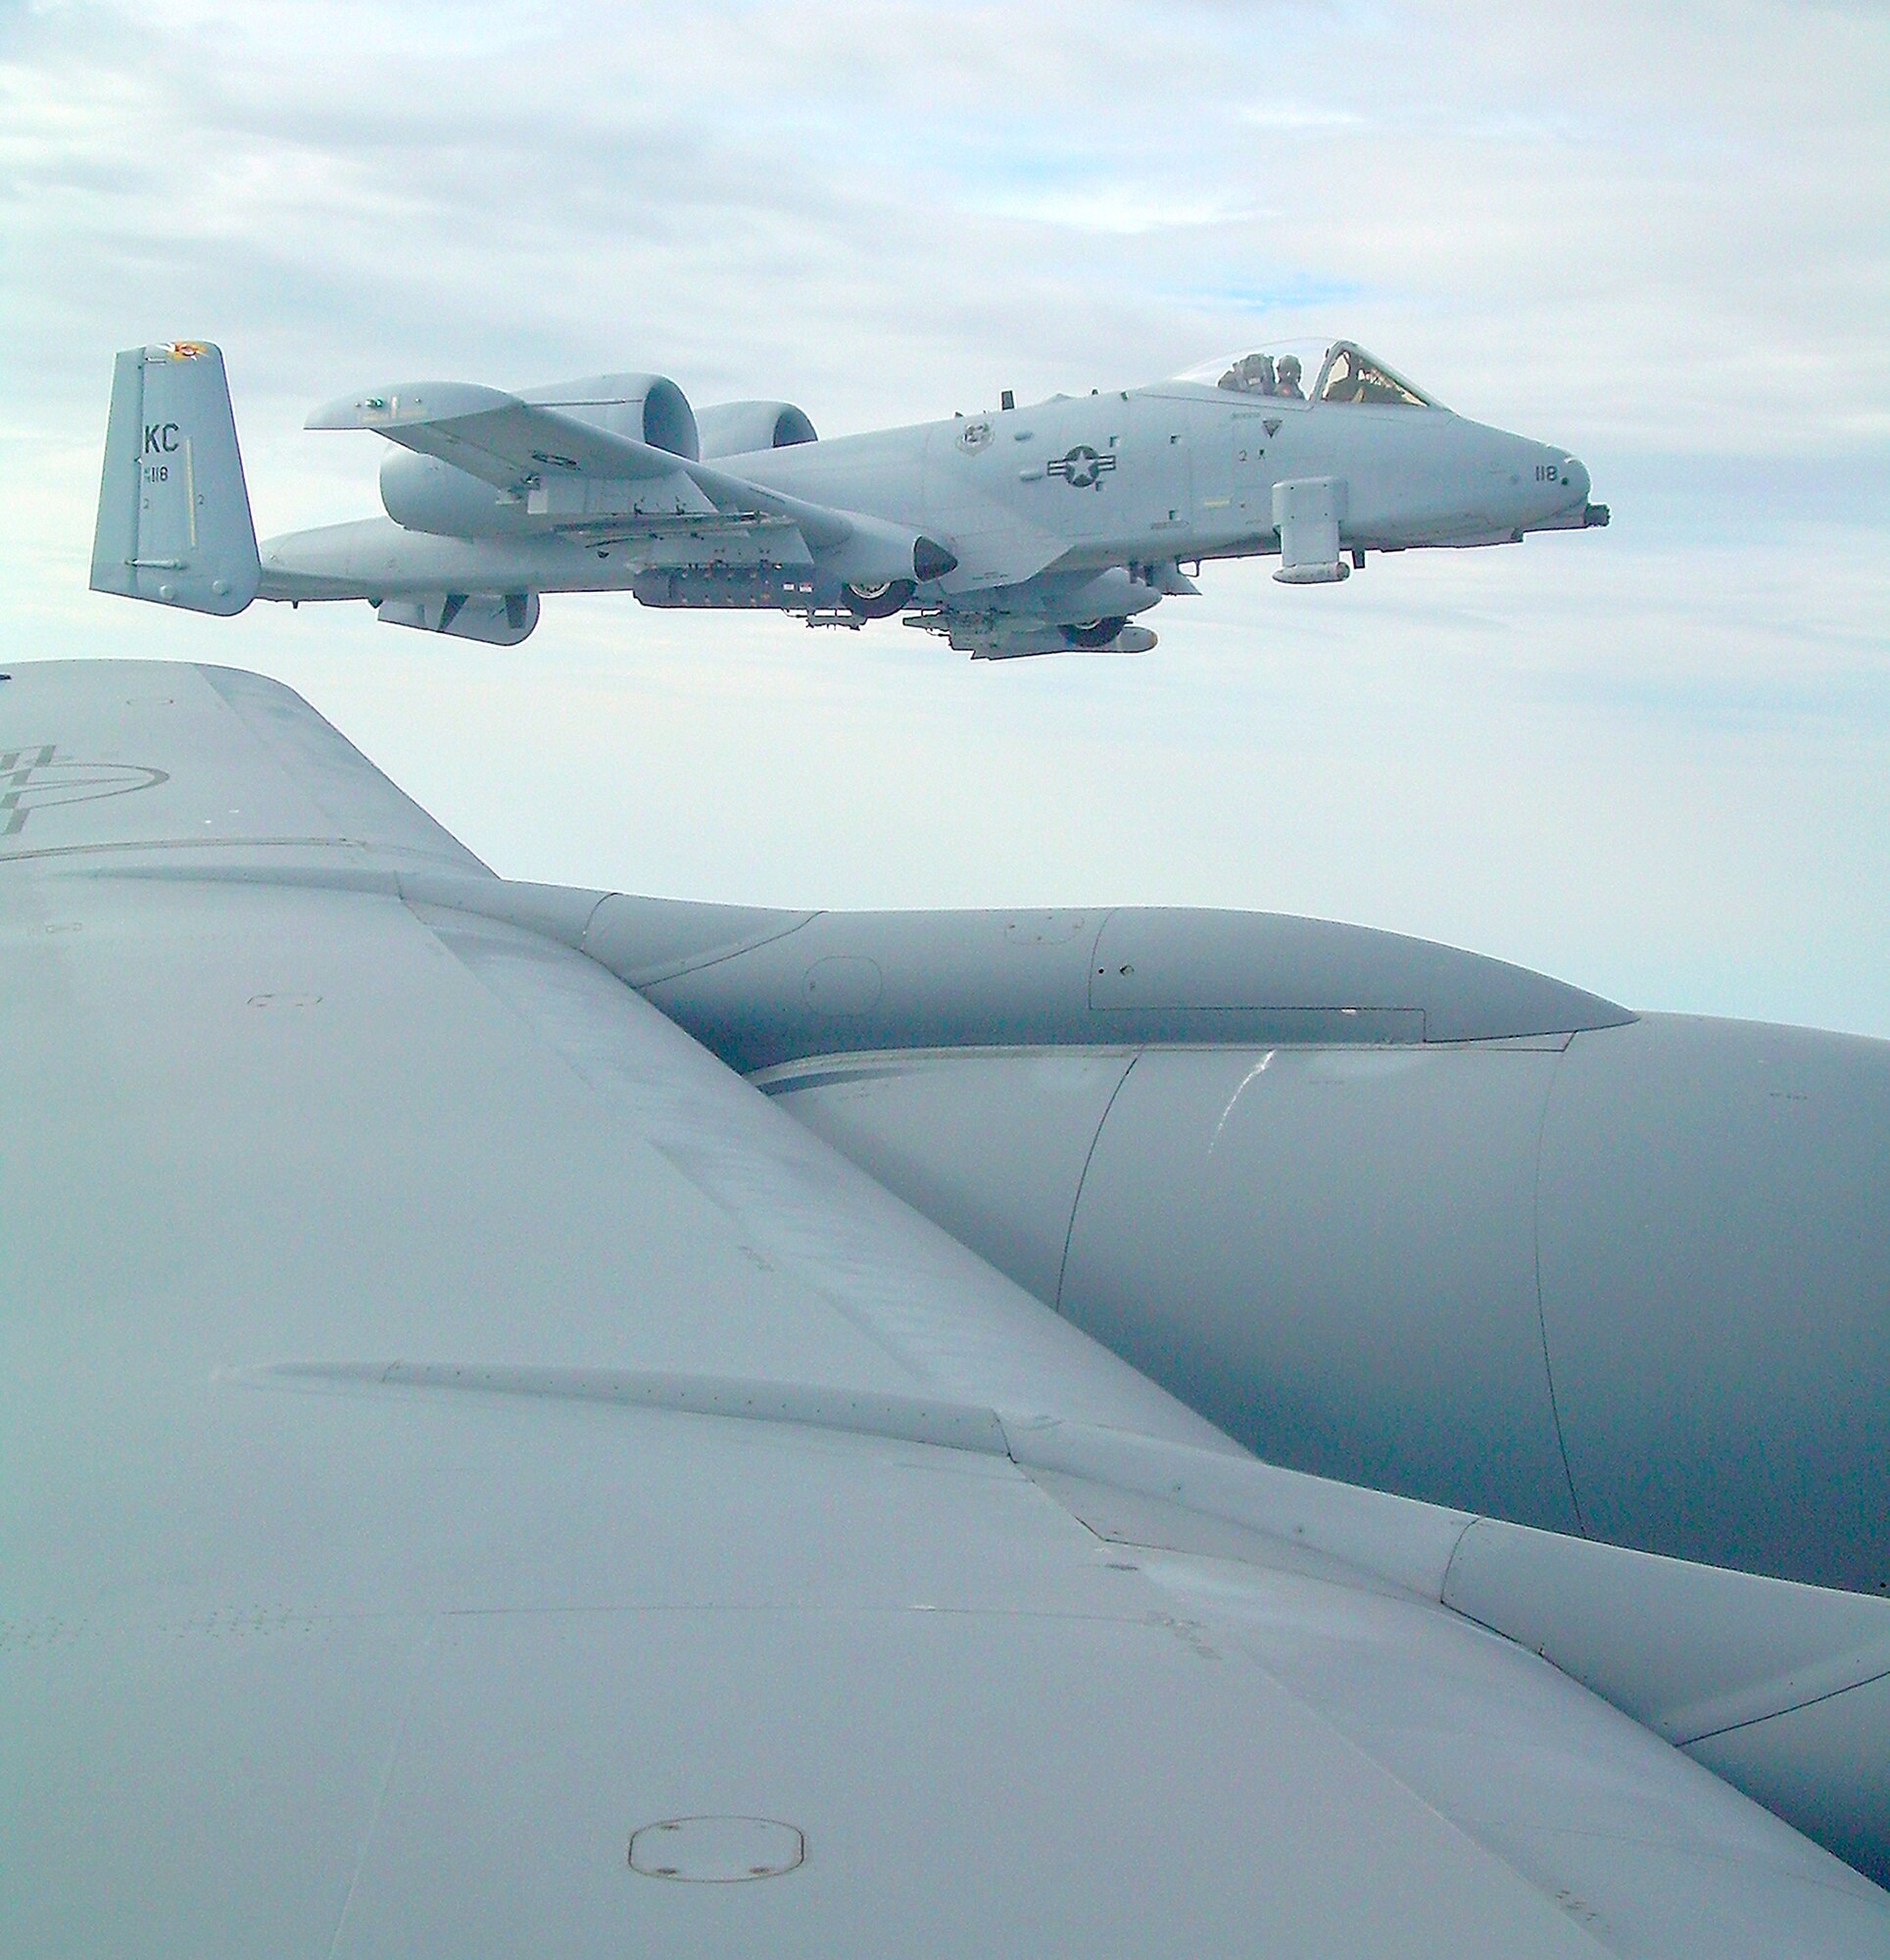 An A-10 Thunderbolt II from the Air Force Reserve's 303rd Fighter Squadron, flown by Maj. Les Bradfield, flies formation off the left wing of a KC-135 Stratotanker as part of the 442nd Fighter Wing's and 509th Bomb Wing's combined civic leader tour April 11. Business and government leaders from around Missouri attended the tour, which fetured stops at Edwards Air Force Base, Calif., and McChord AFB, Wash.  (Photo by Maj. David Kurle)